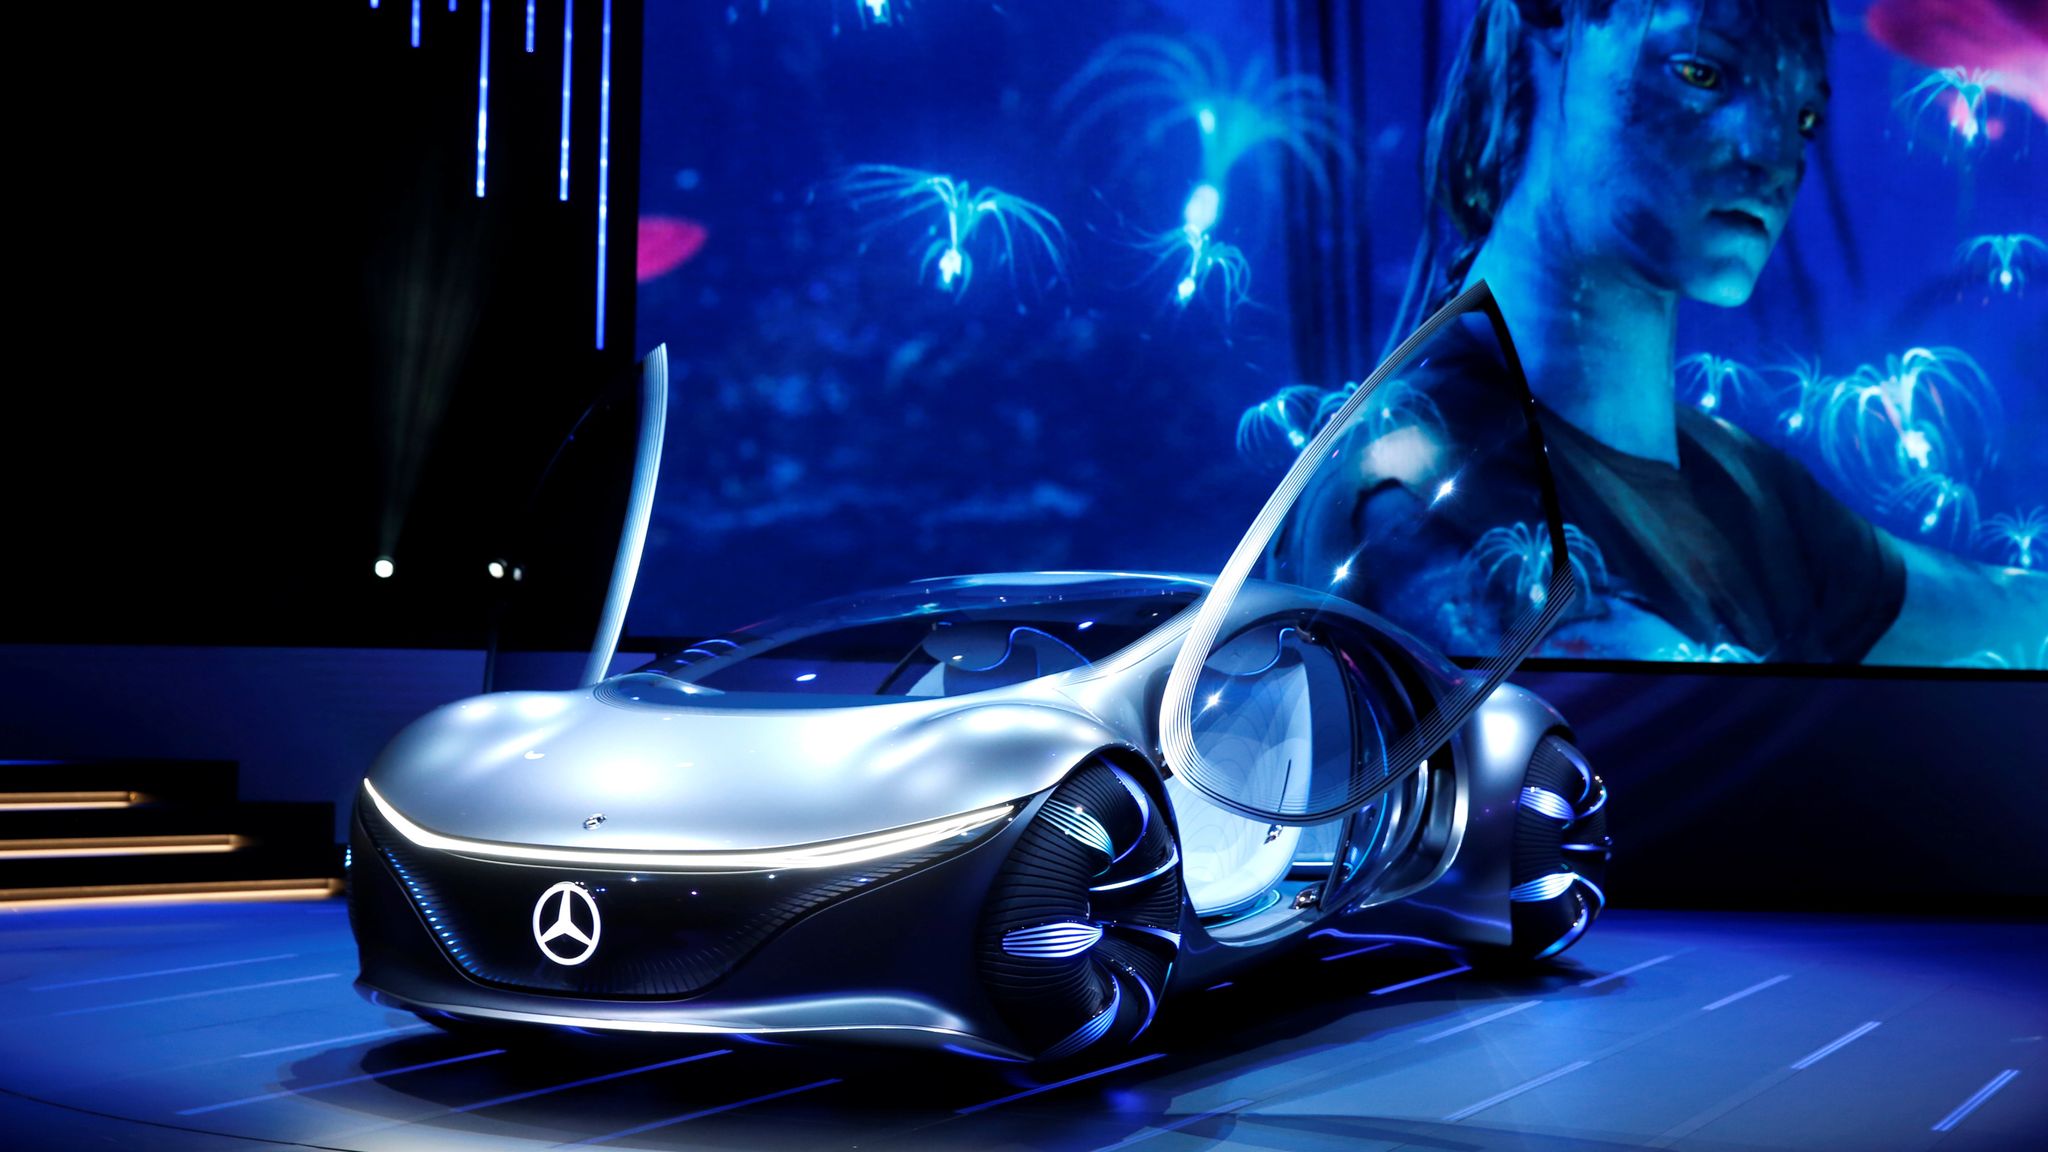 James Cameron Teams with Mercedes Benz for AvatarInspired Vehicle  The  Hollywood Reporter